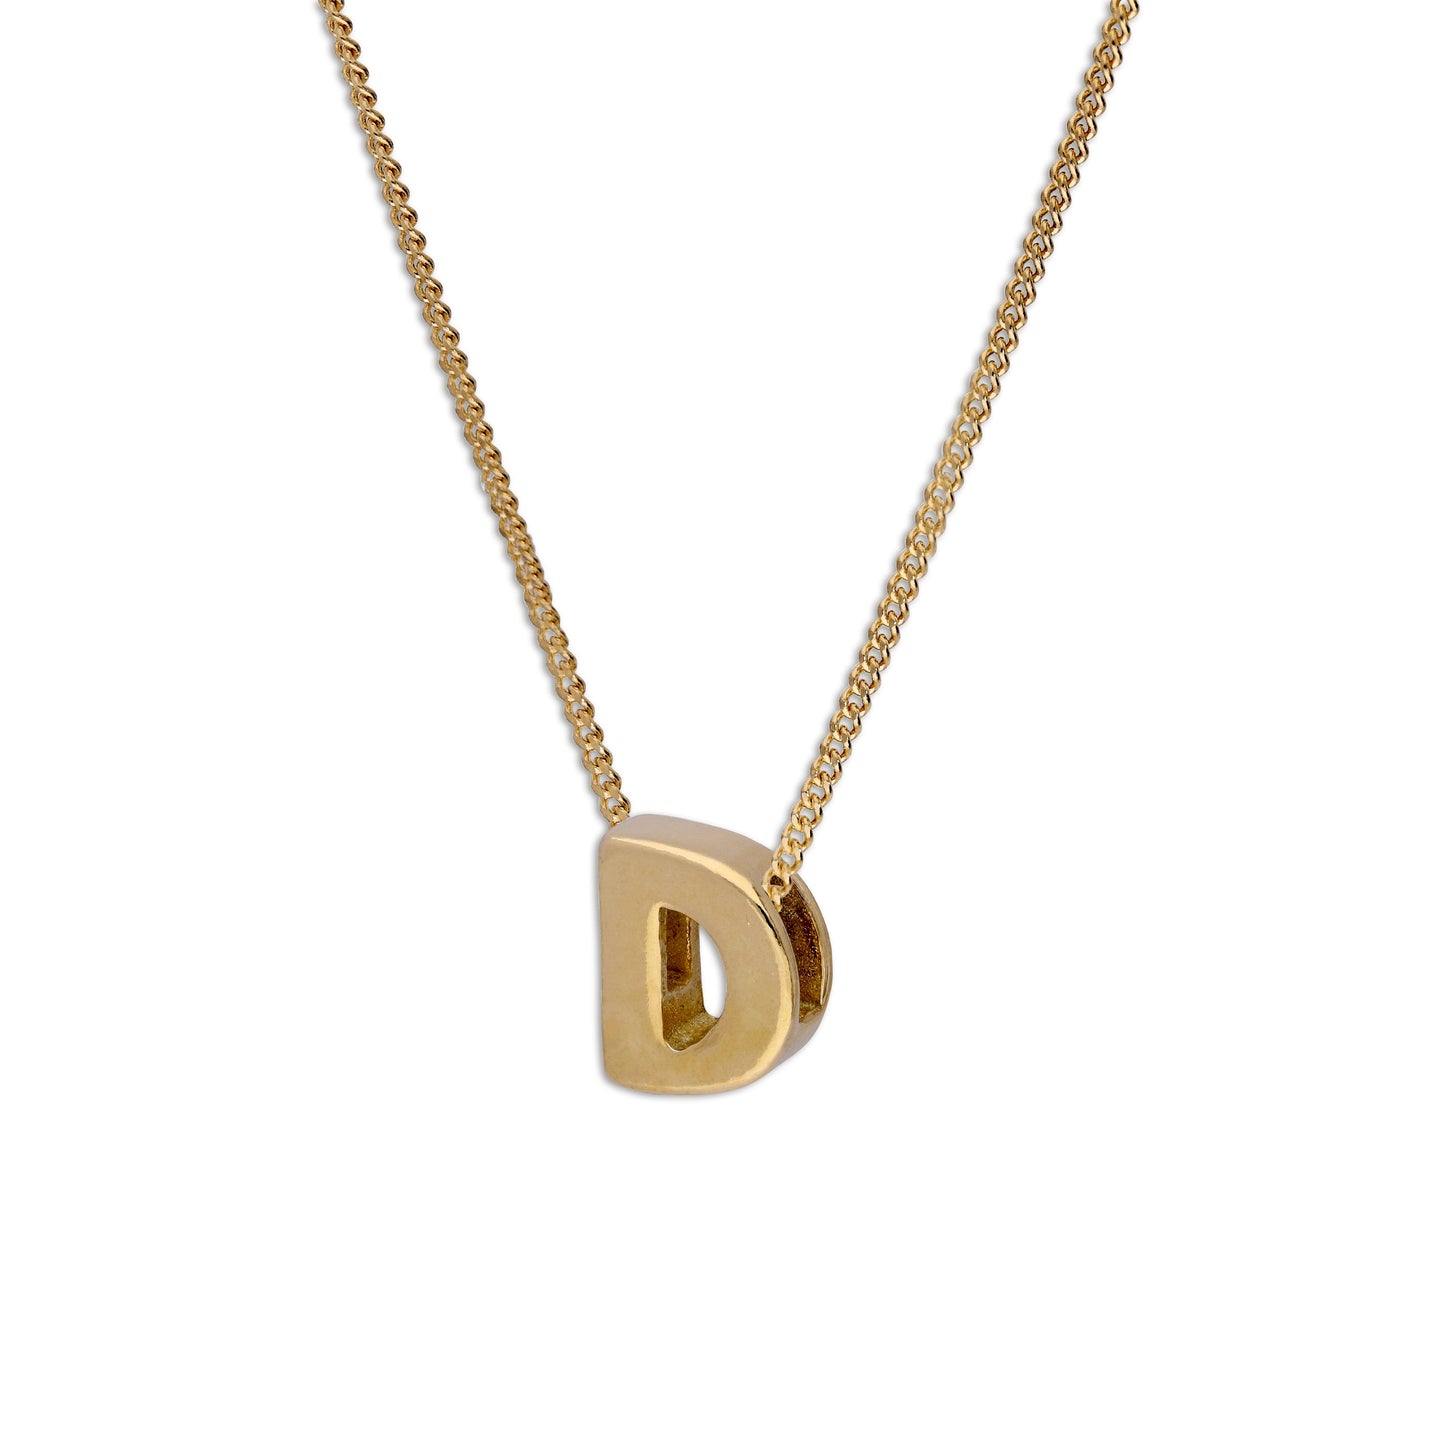 Gold Plated Sterling Silver Threader Letter D Bead Necklace 16 - 22 Inches